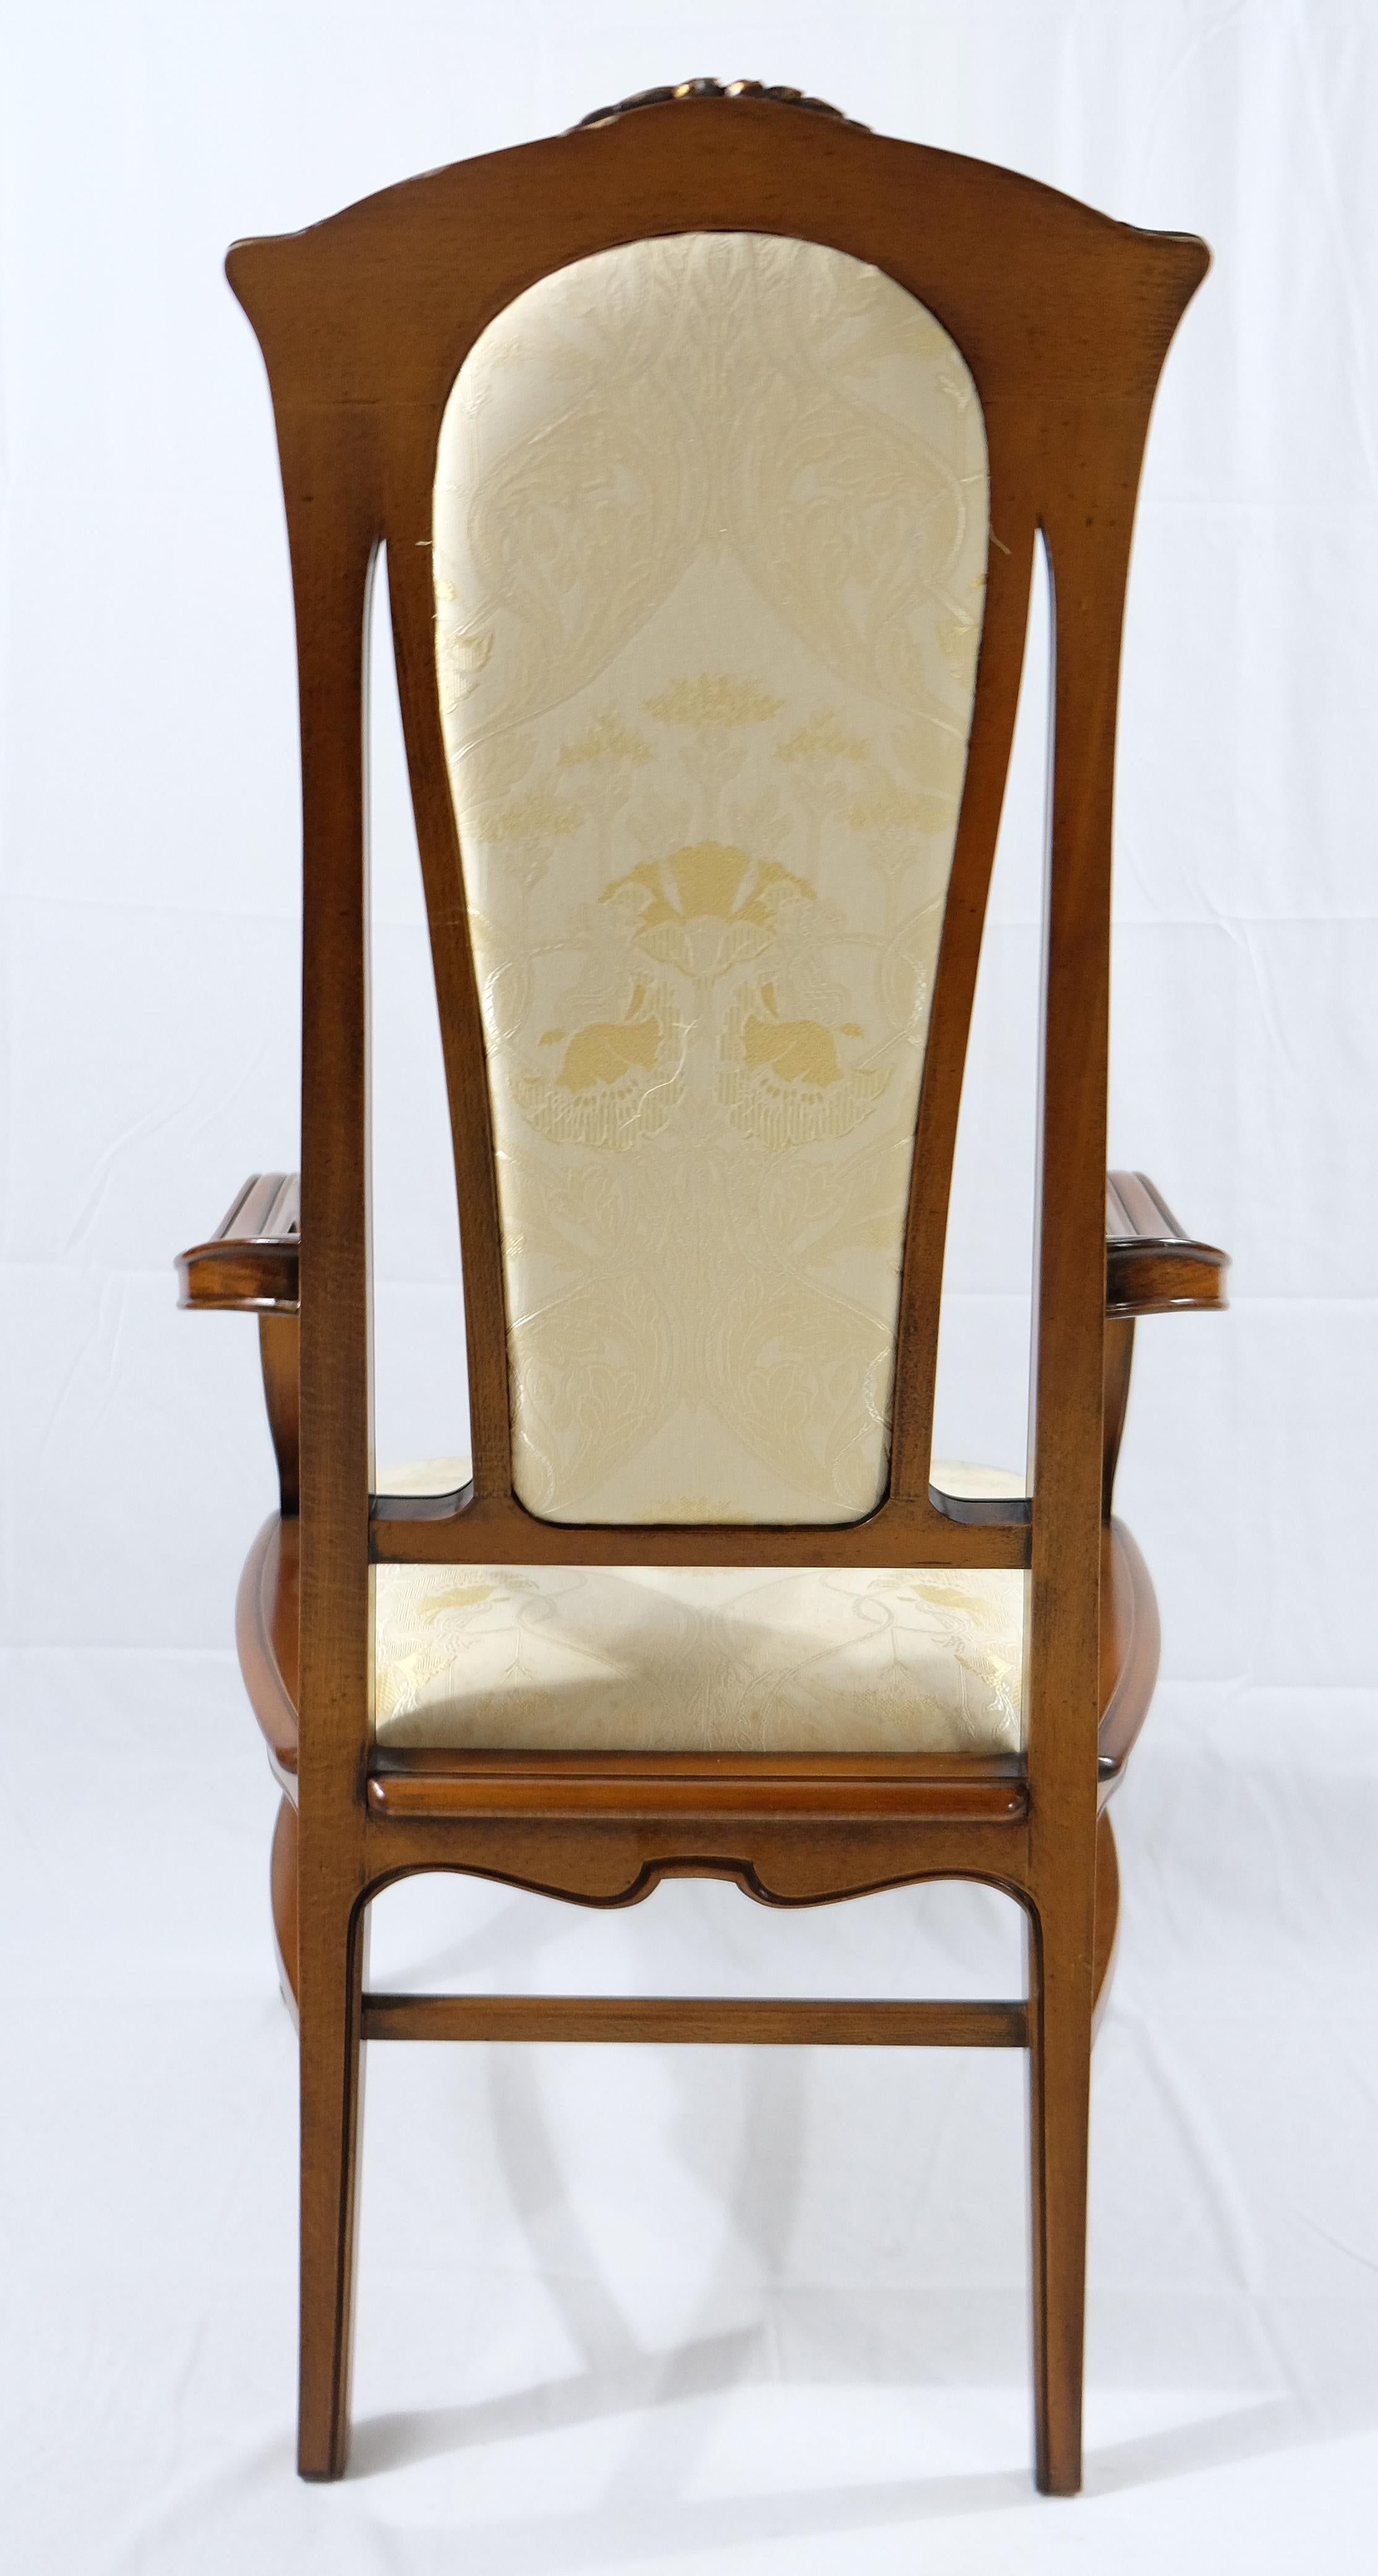  Medea Hand-Carved Art Nouveau Style Armchairs, Pair In New Condition For Sale In Miami, FL